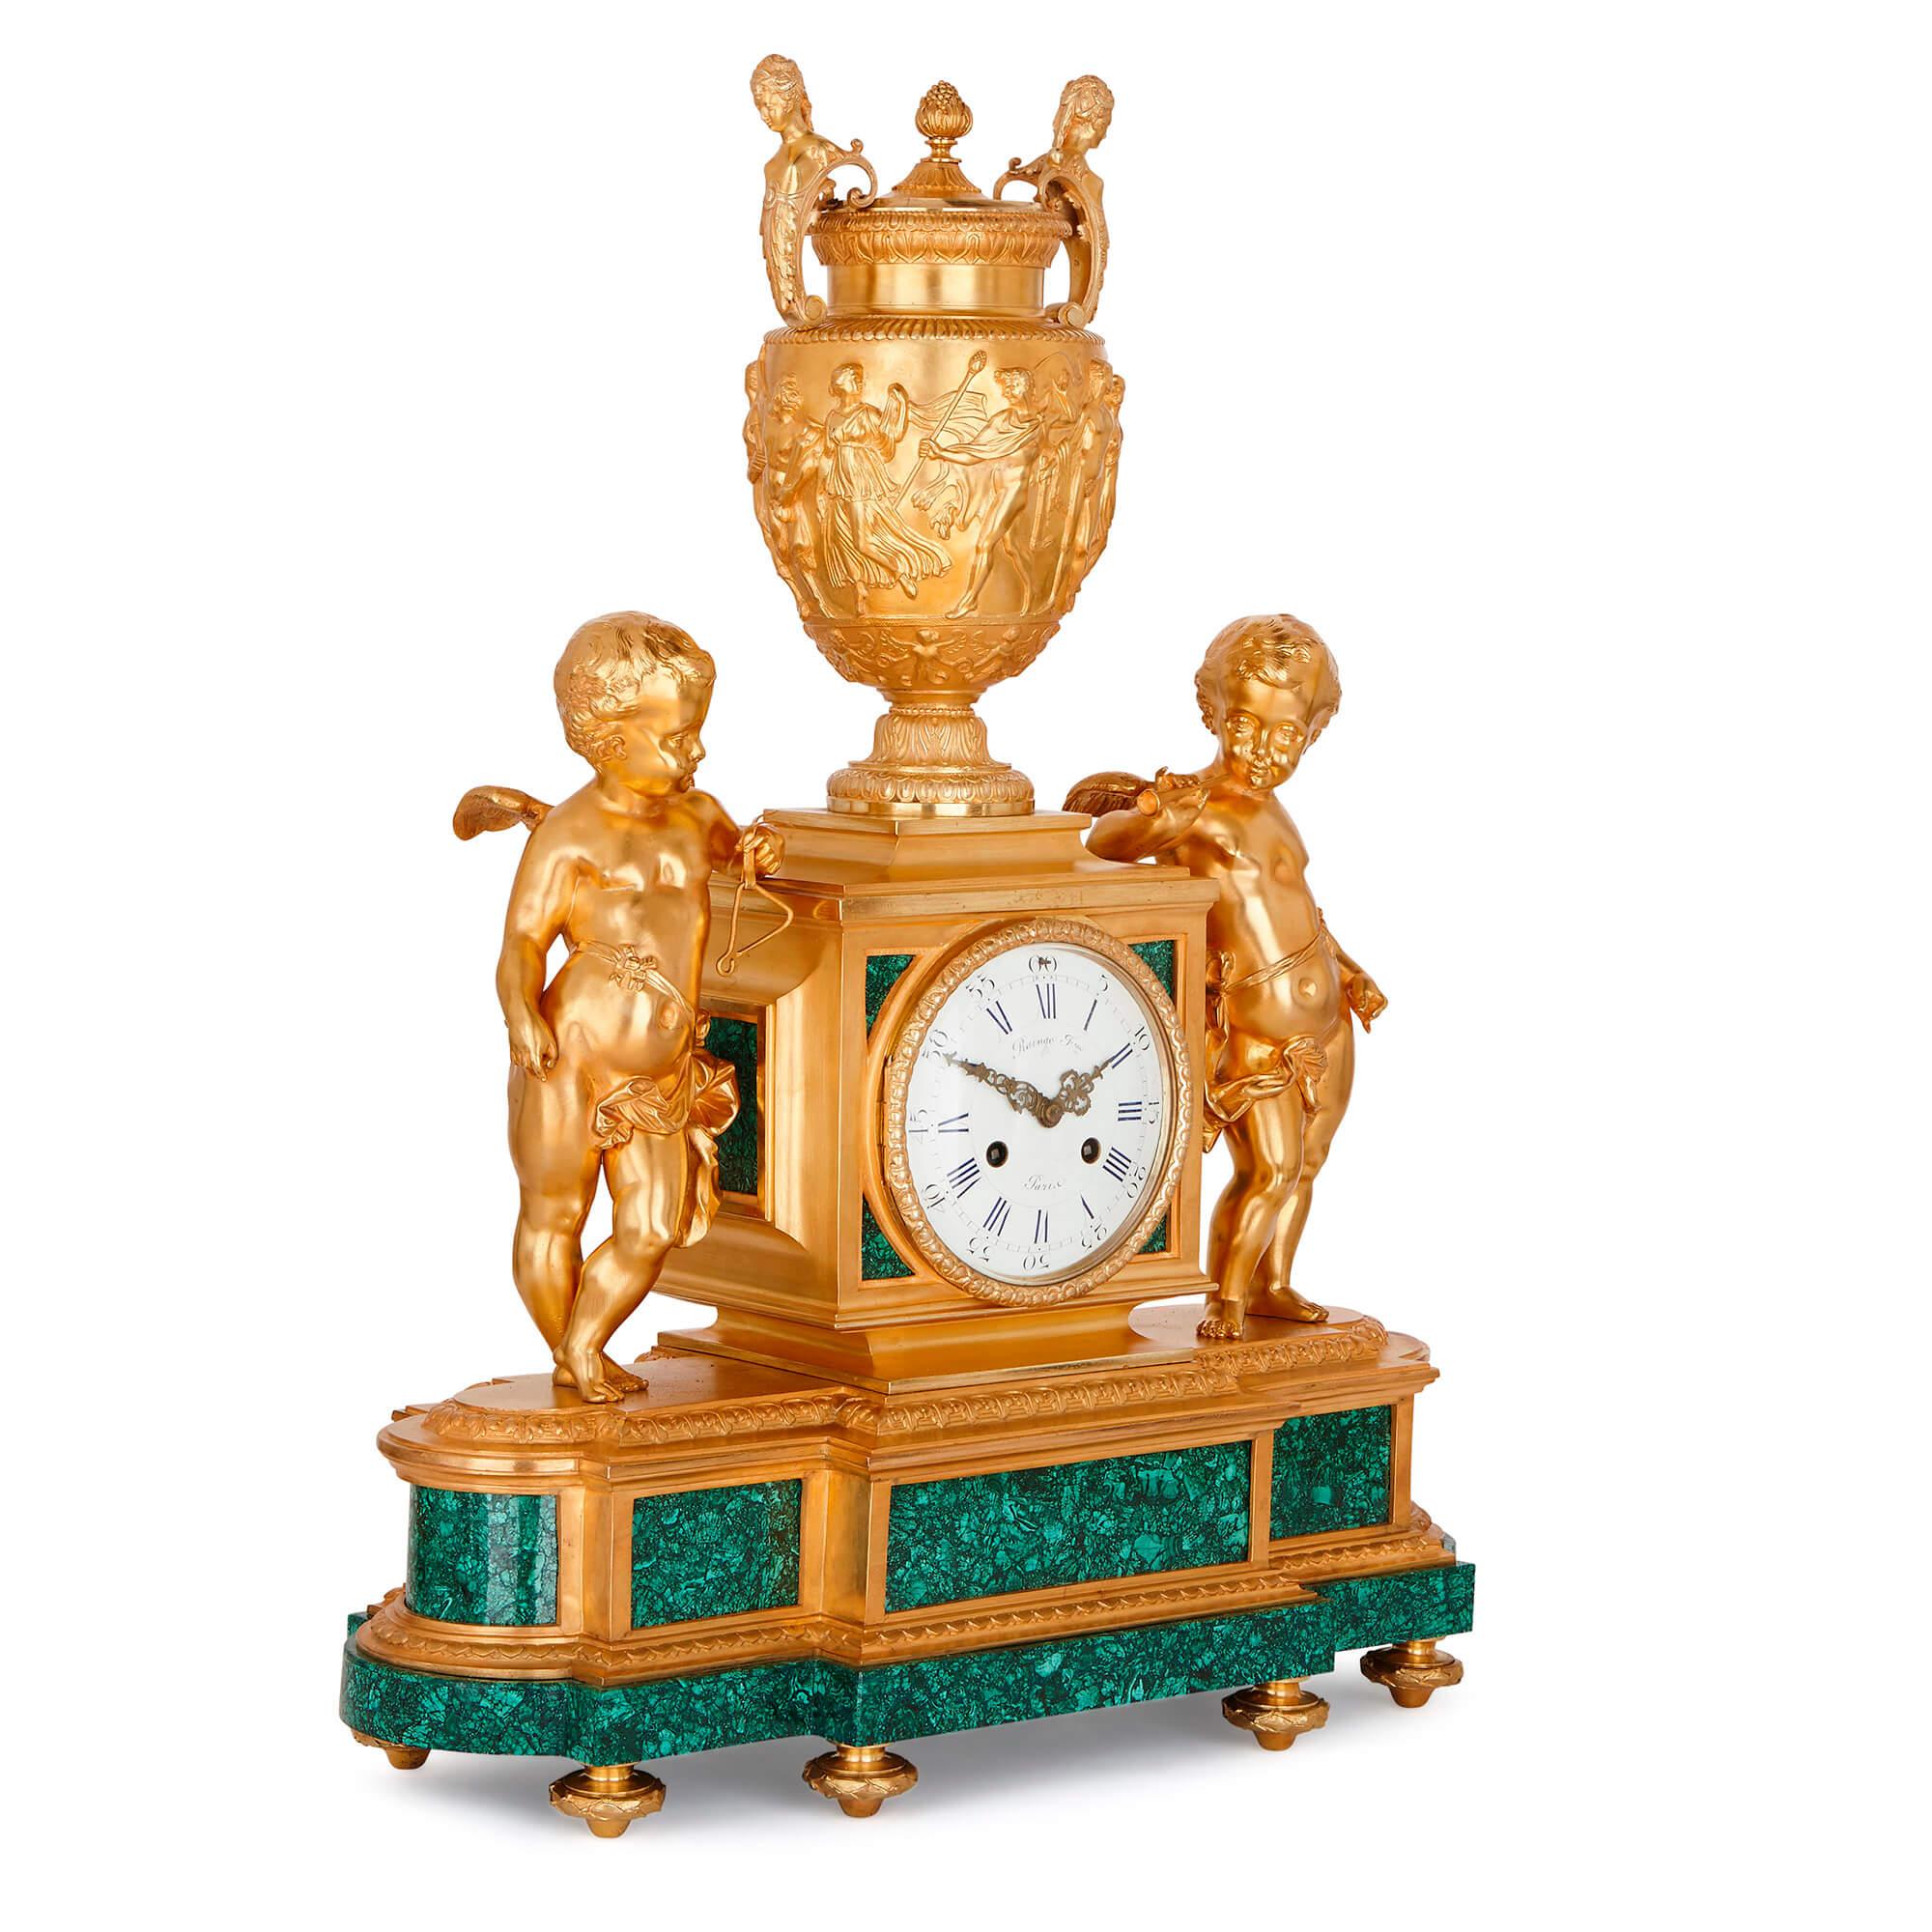 This charming neoclassical garniture is formed of a clock and two flanking vases on pedestals. The clock, positioned at the centre of the set, is fitted with an enamel dial and set on a malachite base. Flanking the clock face on either side are two